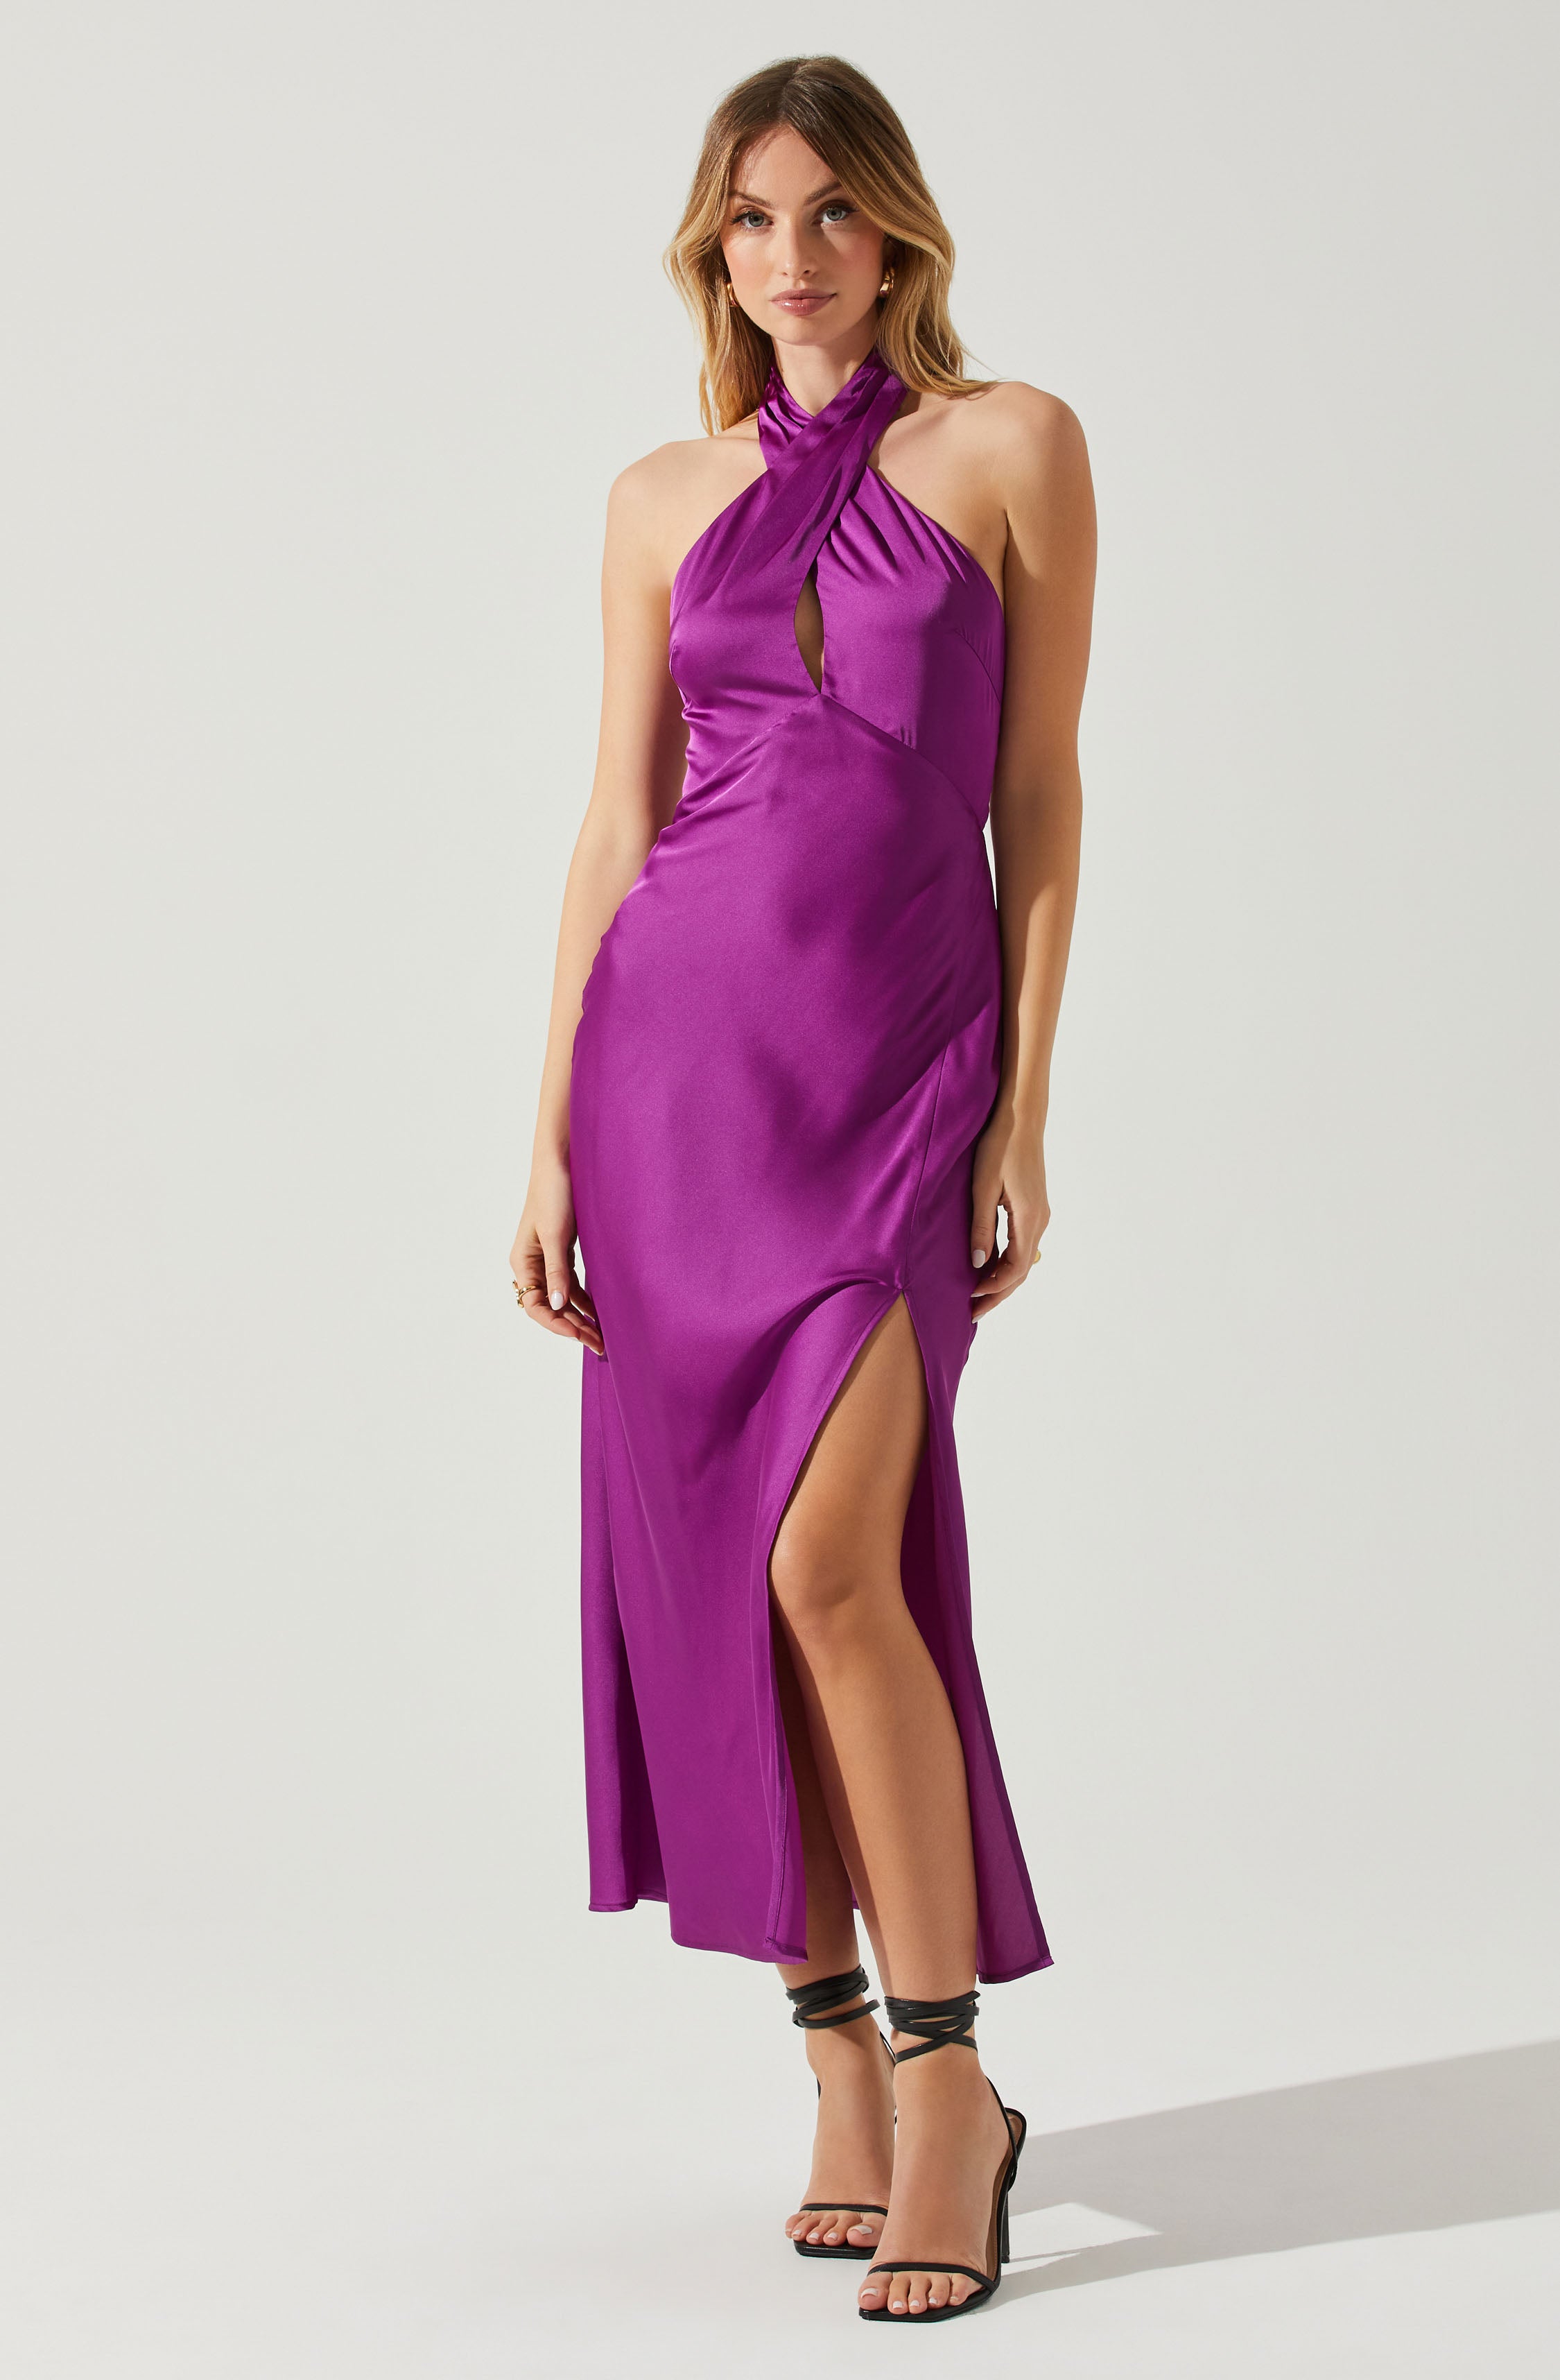 Product Descriptions: Feel relaxed with these Satin Club-Wear